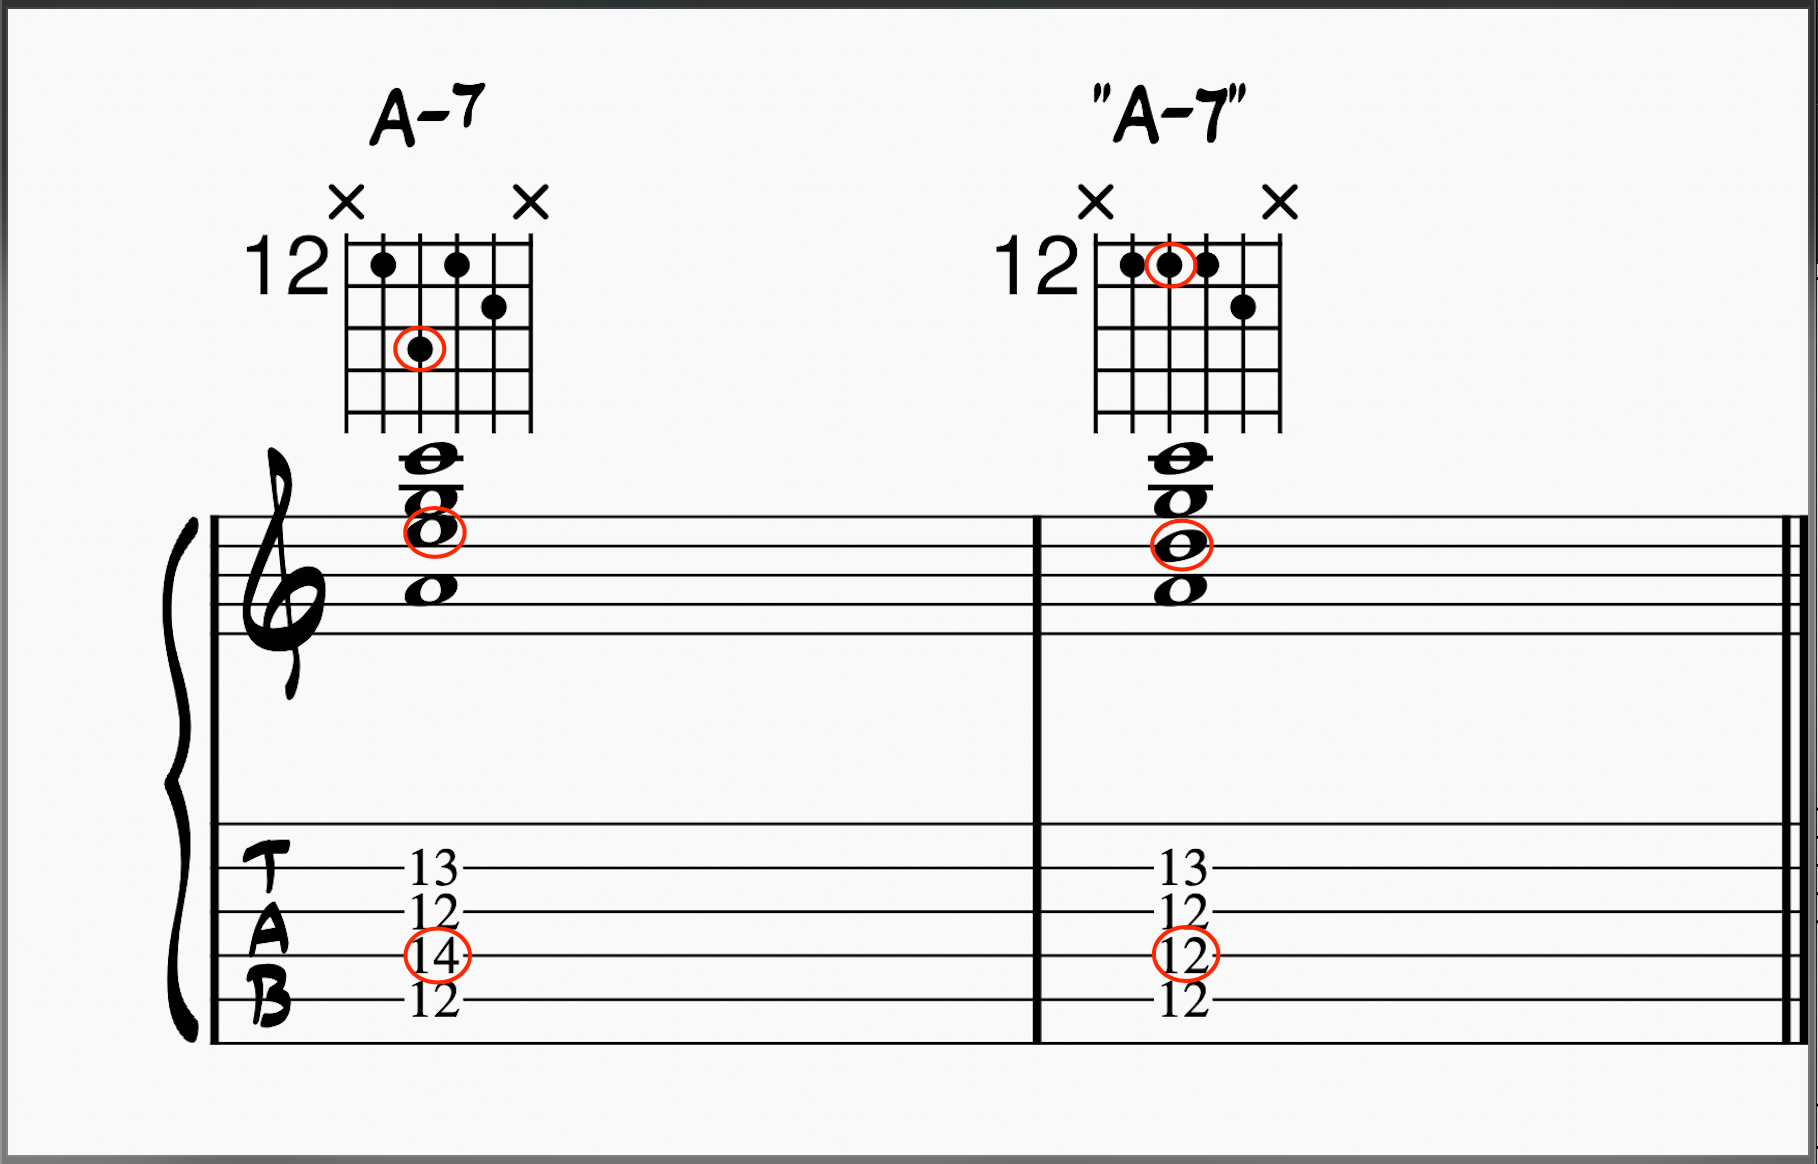 Comparing a A-7 voicing on guitar to its quartal voicing equivalent 